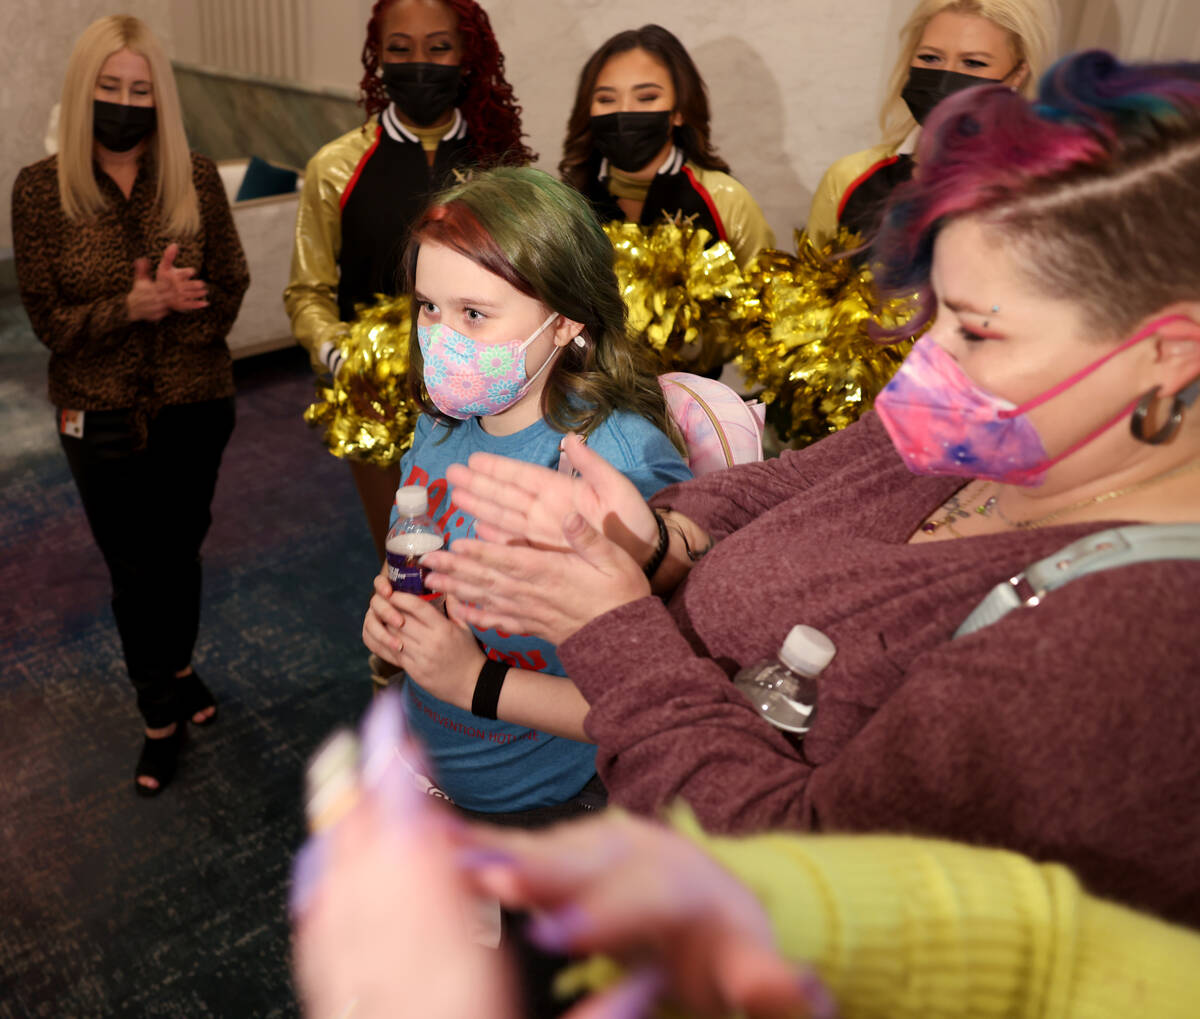 Harli Hecht, 10, who suffers from rare autoimmune conditions, arrives with her mother Brandi He ...